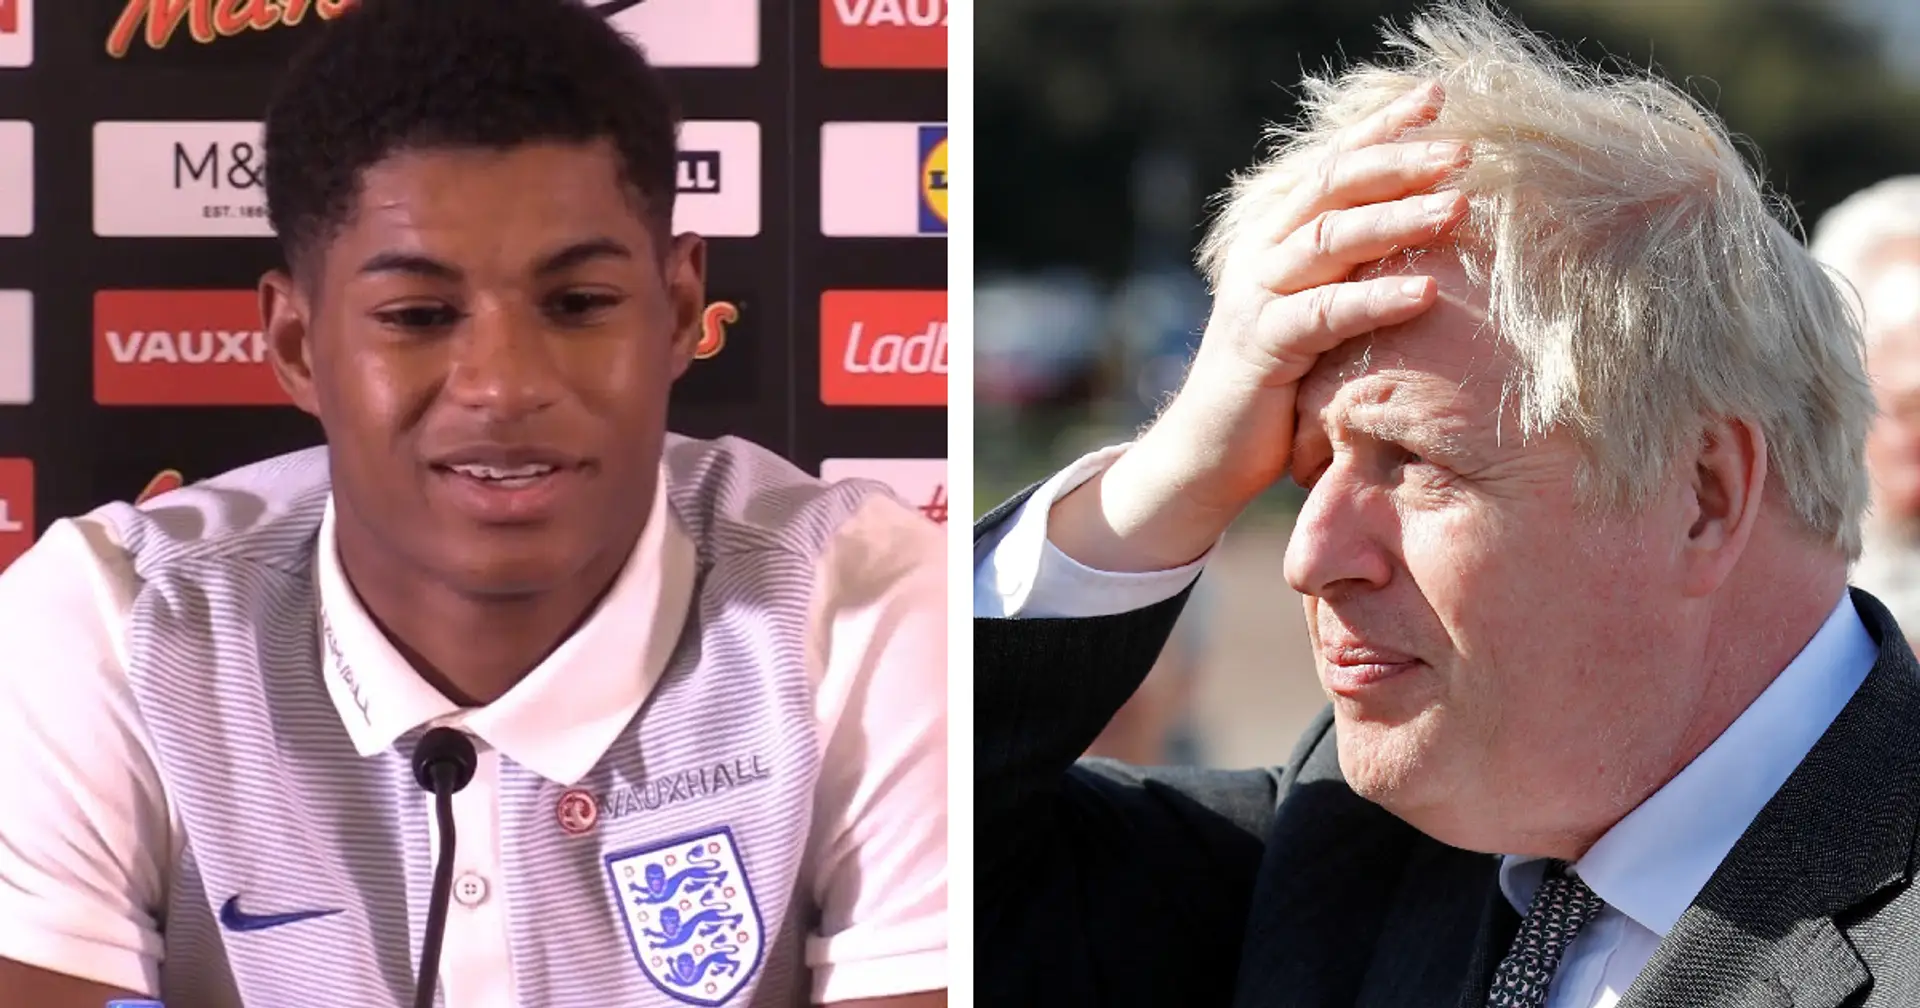 Marcus Rashford reveals if he'd run for prime minister one day 